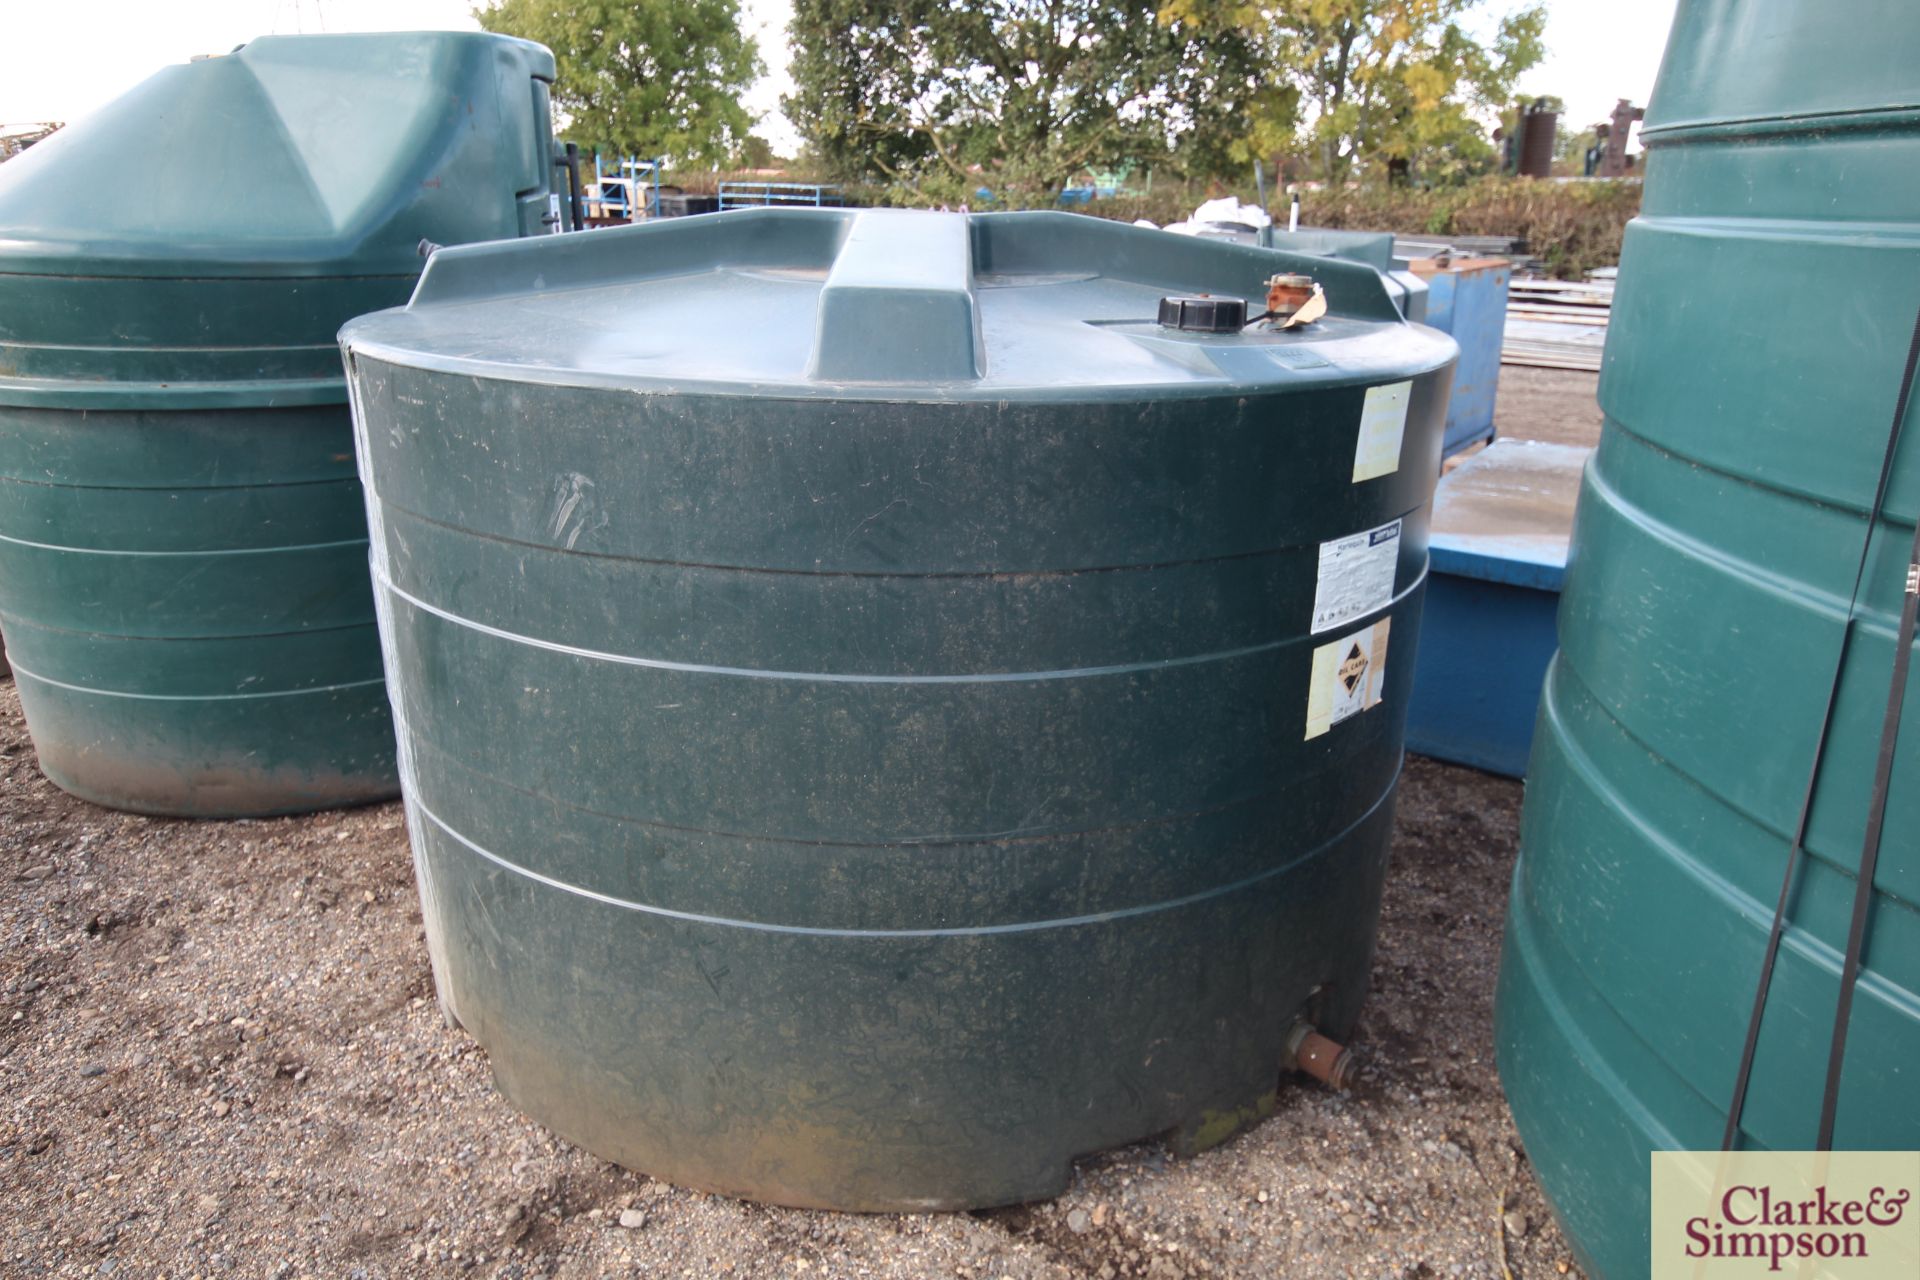 3,900L vertical plastic water tank. Used for sprayer filling. Owned from new. For sale due to